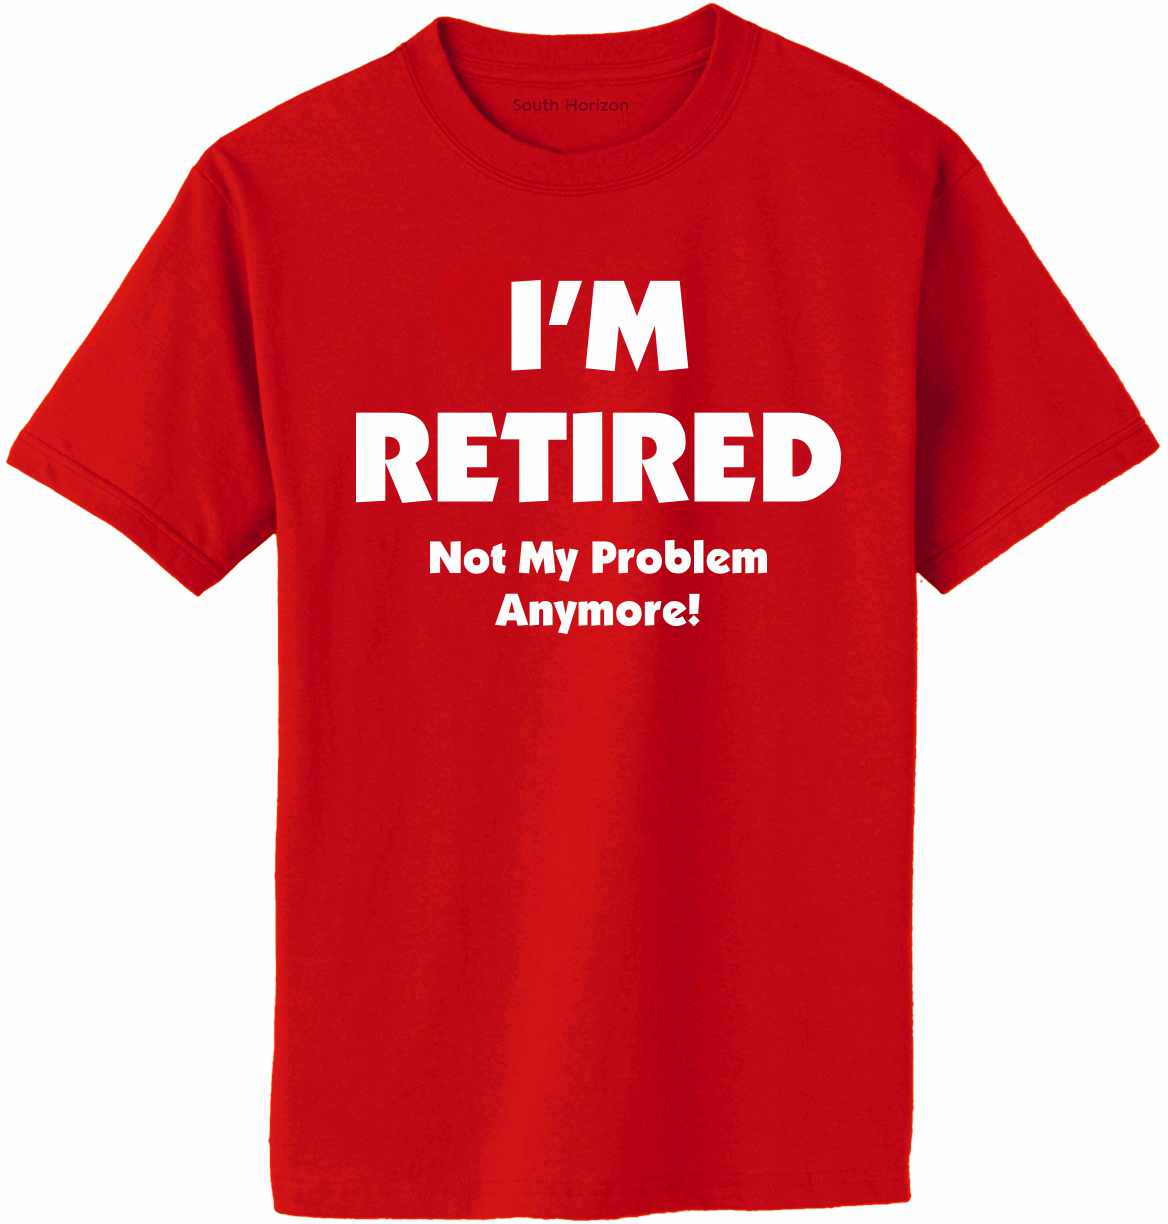 I'm Retired Not My Problem Anymore T-Shirt - Fathers Day Shirt, Red / Medium